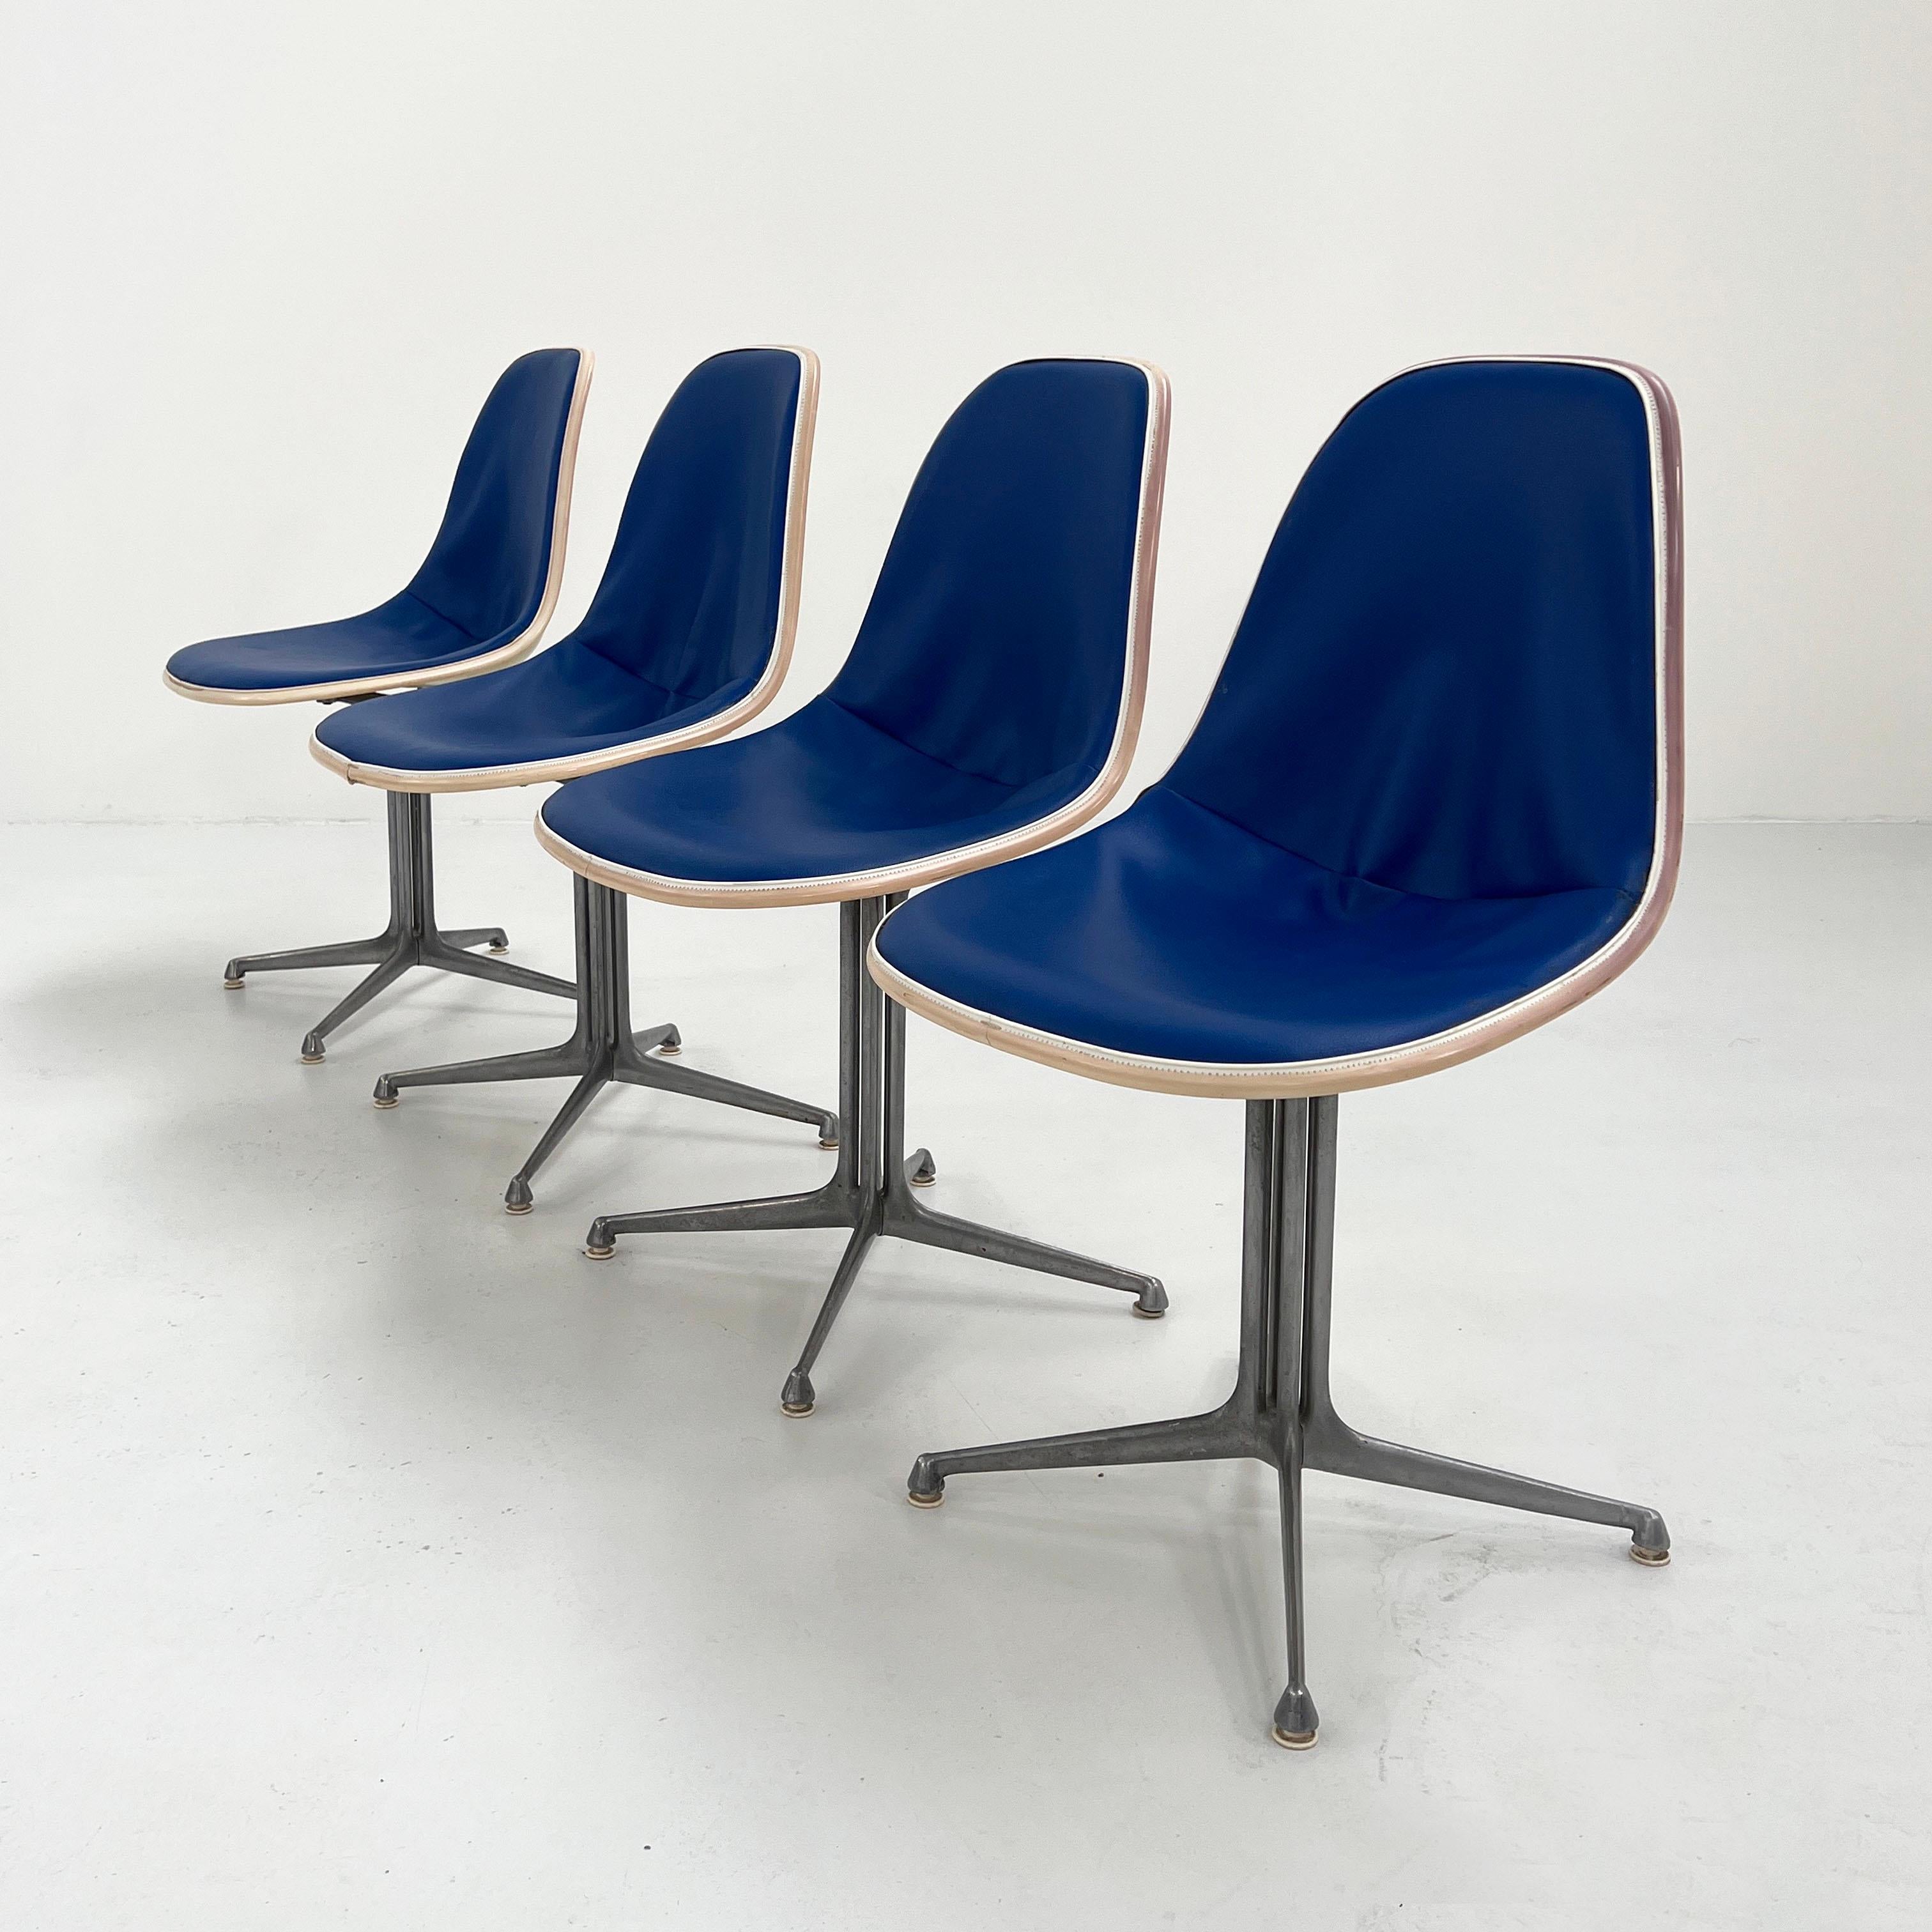 Mid-Century Modern Set of 4 La Fonda Dining Chairs by Charles & Ray Eames for Herman Miller, 1960s